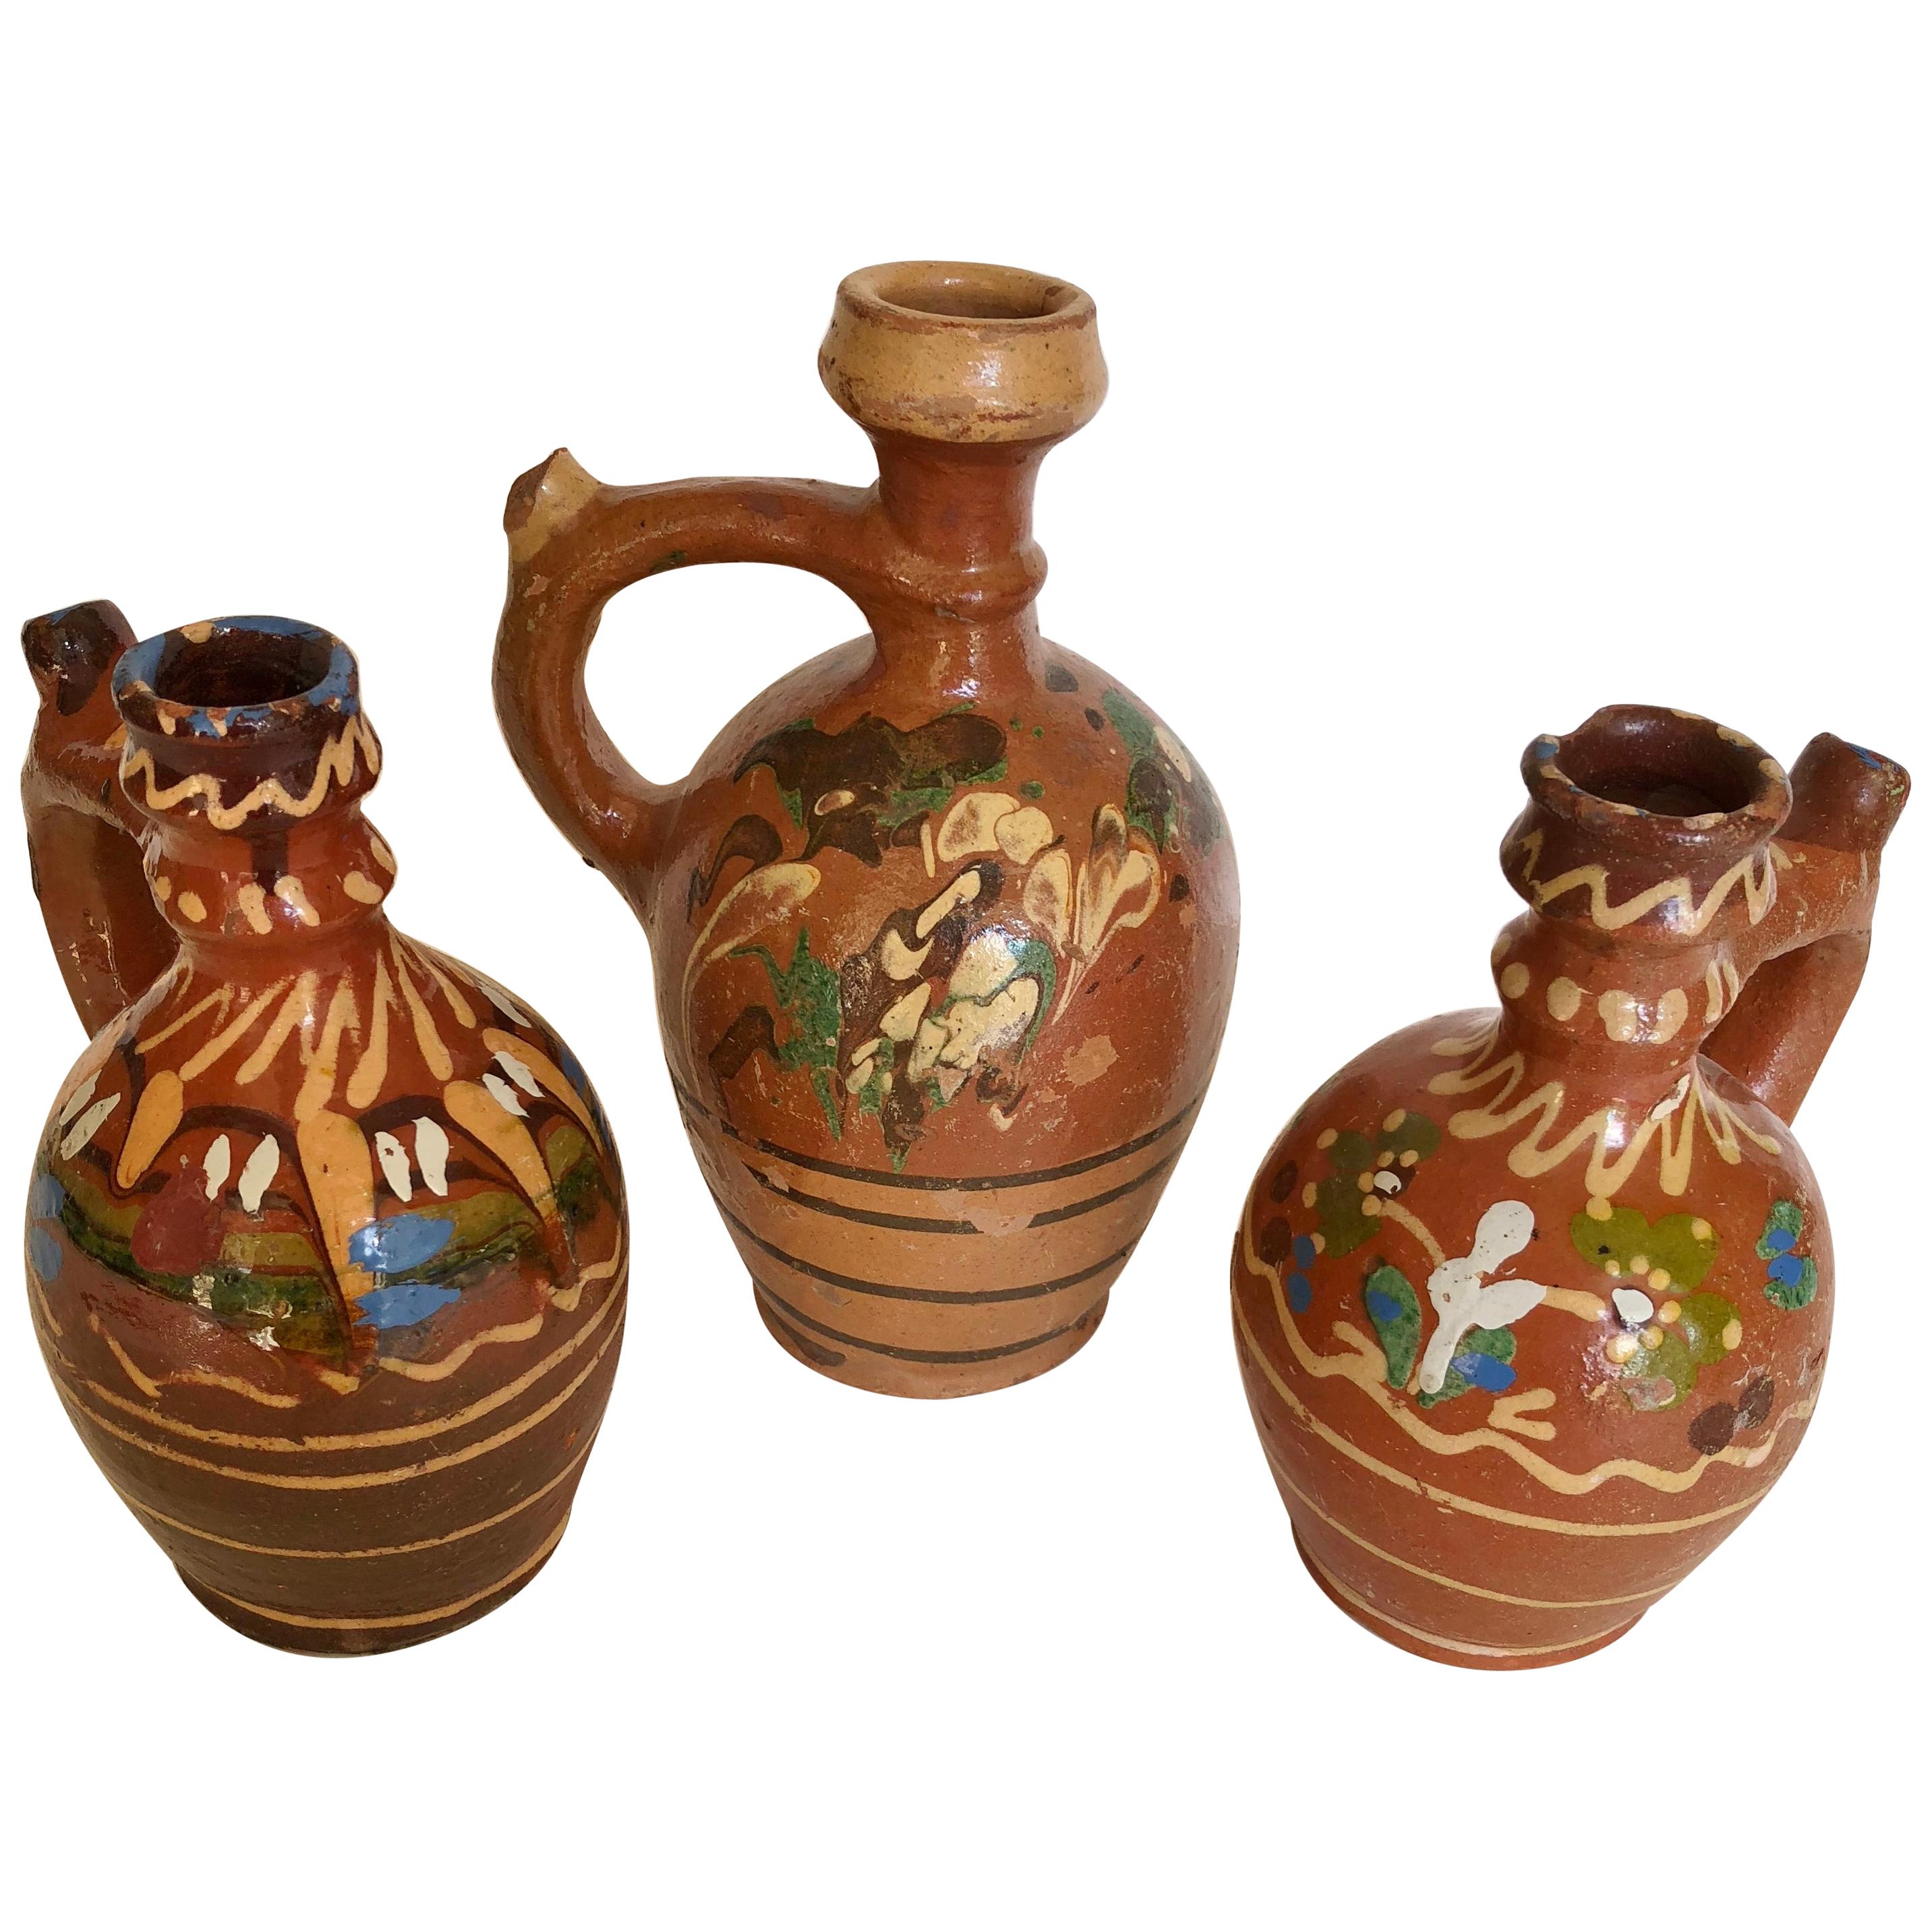 Group of Three Terracotta Pottery Folk Art Carafes from Transylvania, Serbia For Sale